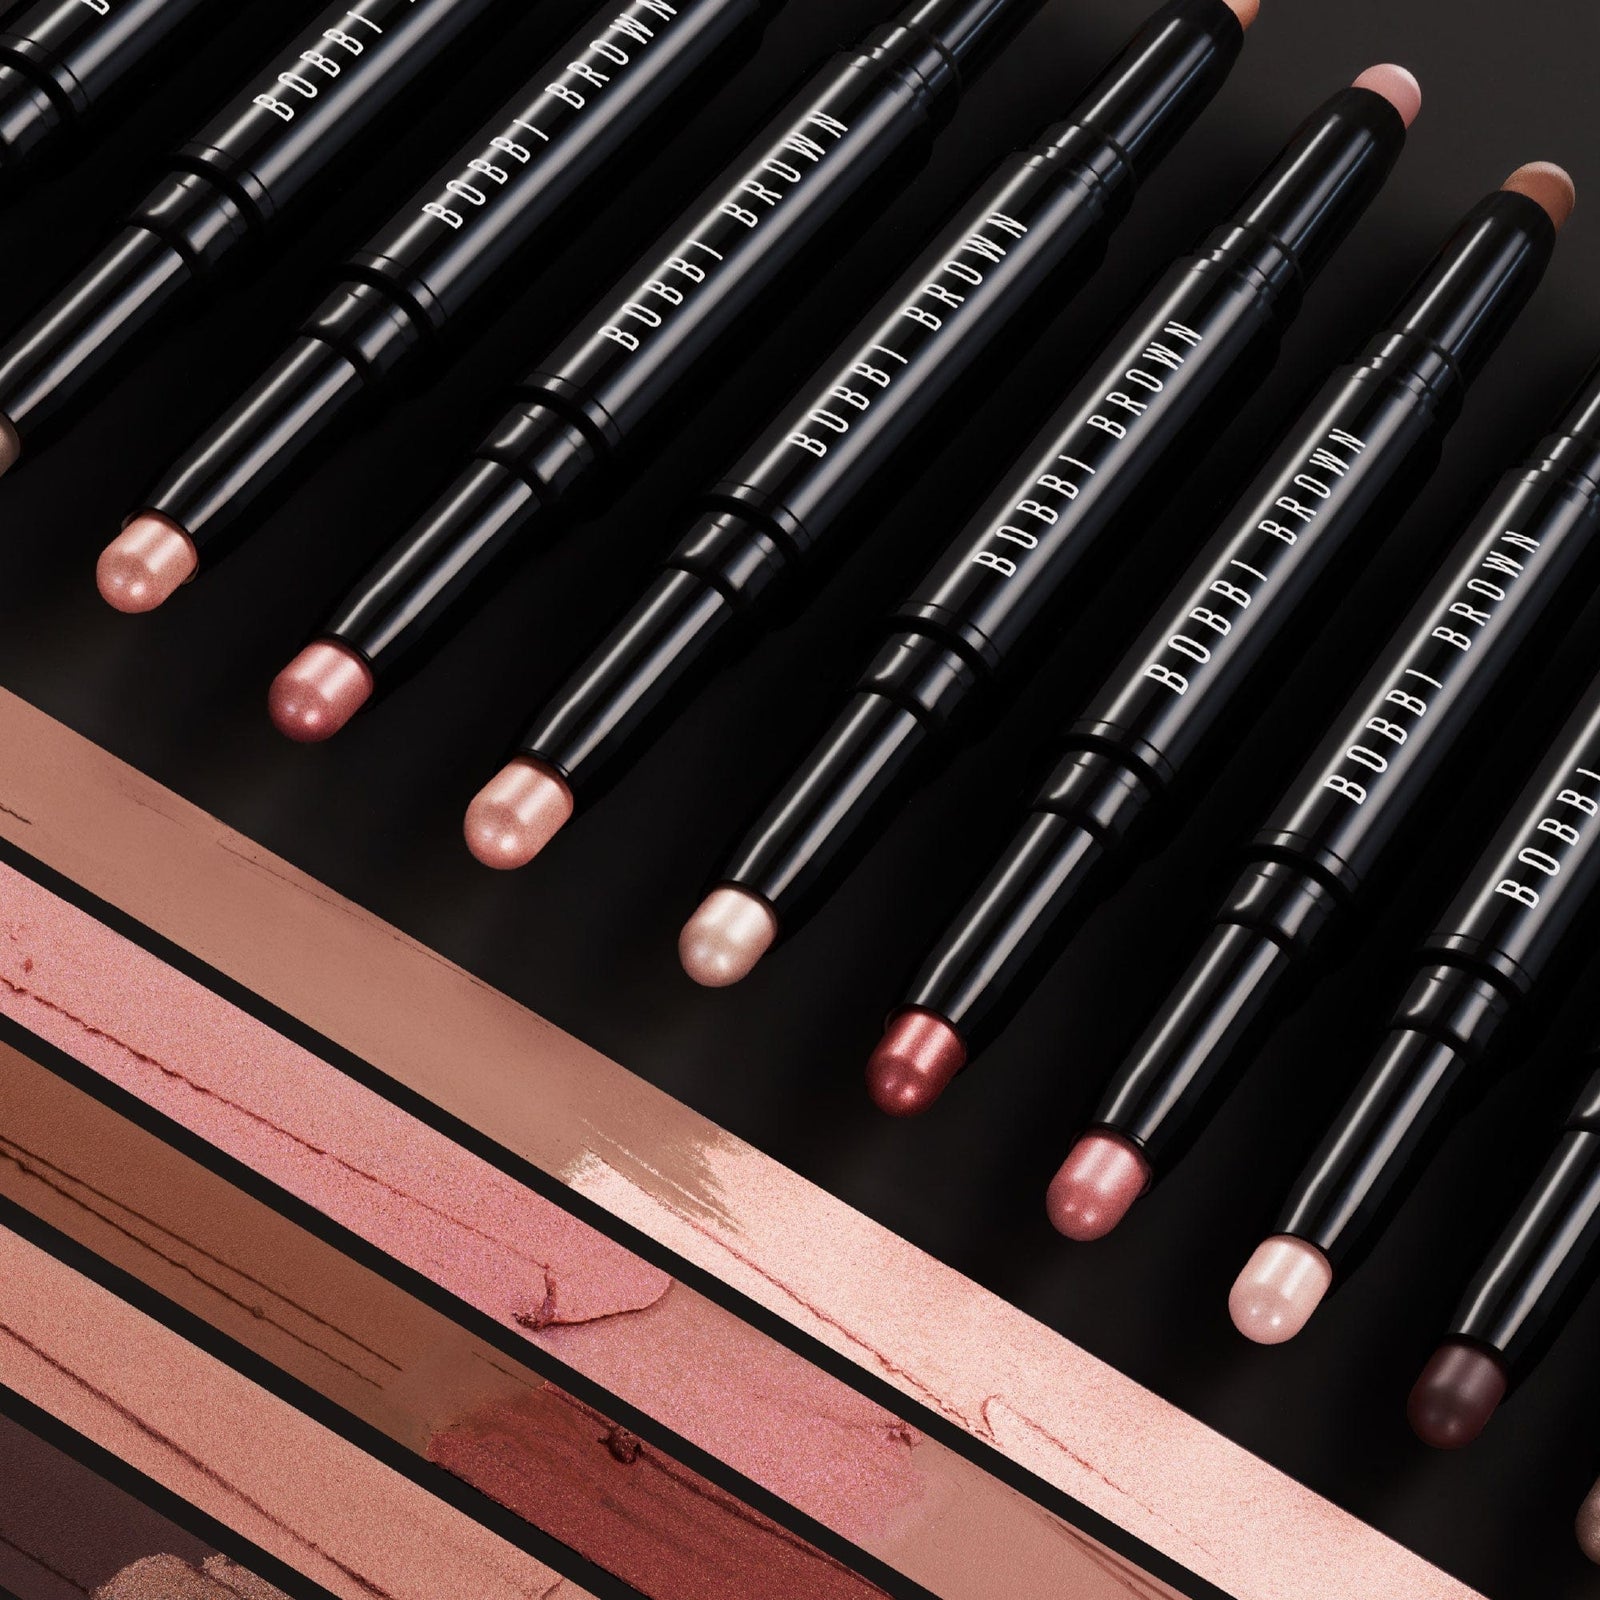 Bobbi Brown Dual-Ended Long-Wear Cream Shadow Stick in Rusted Pink/Cinnamon